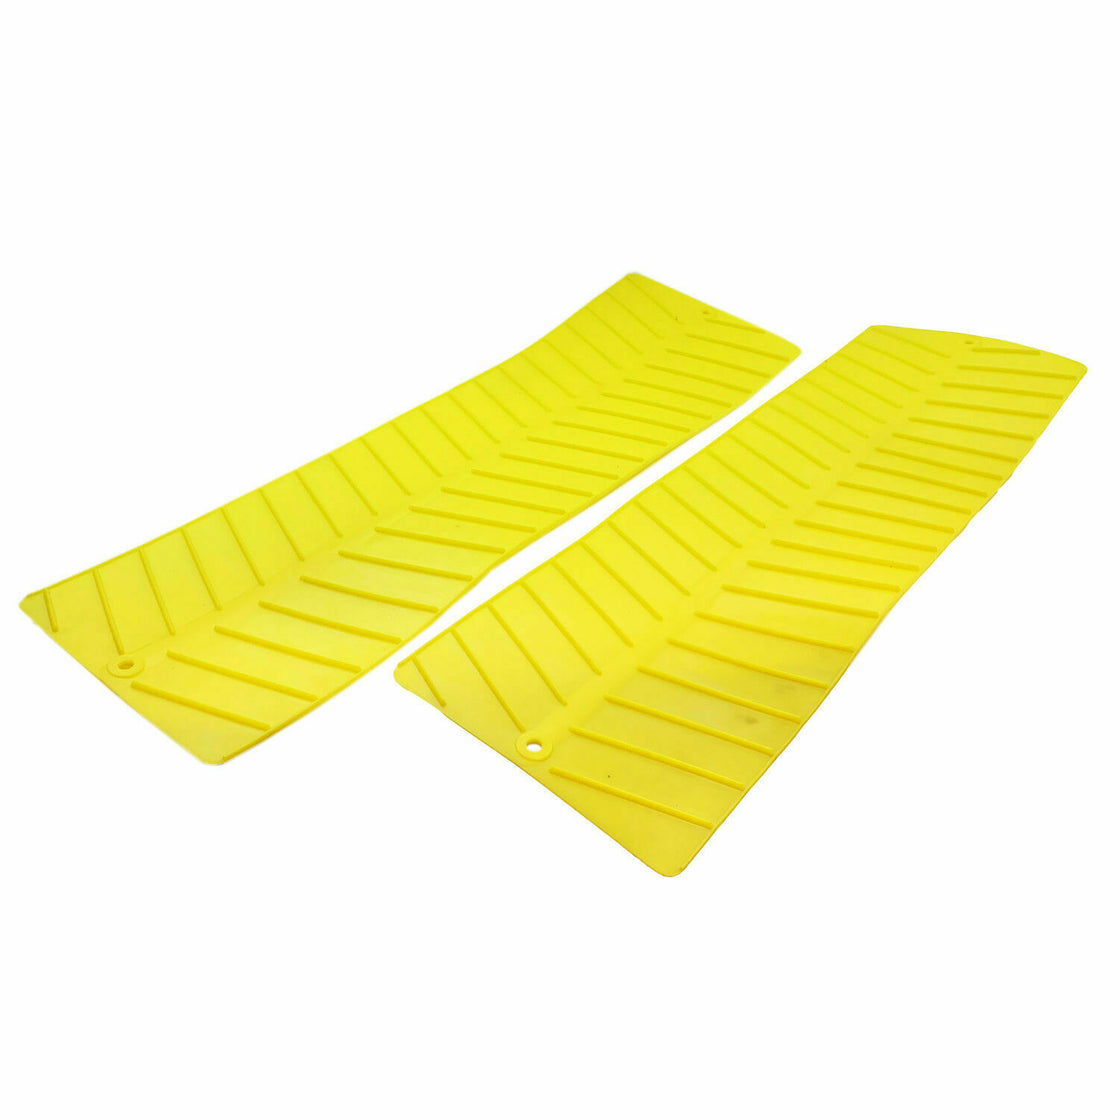 2 Pack Of Non-Slip Traction Recovery Mats